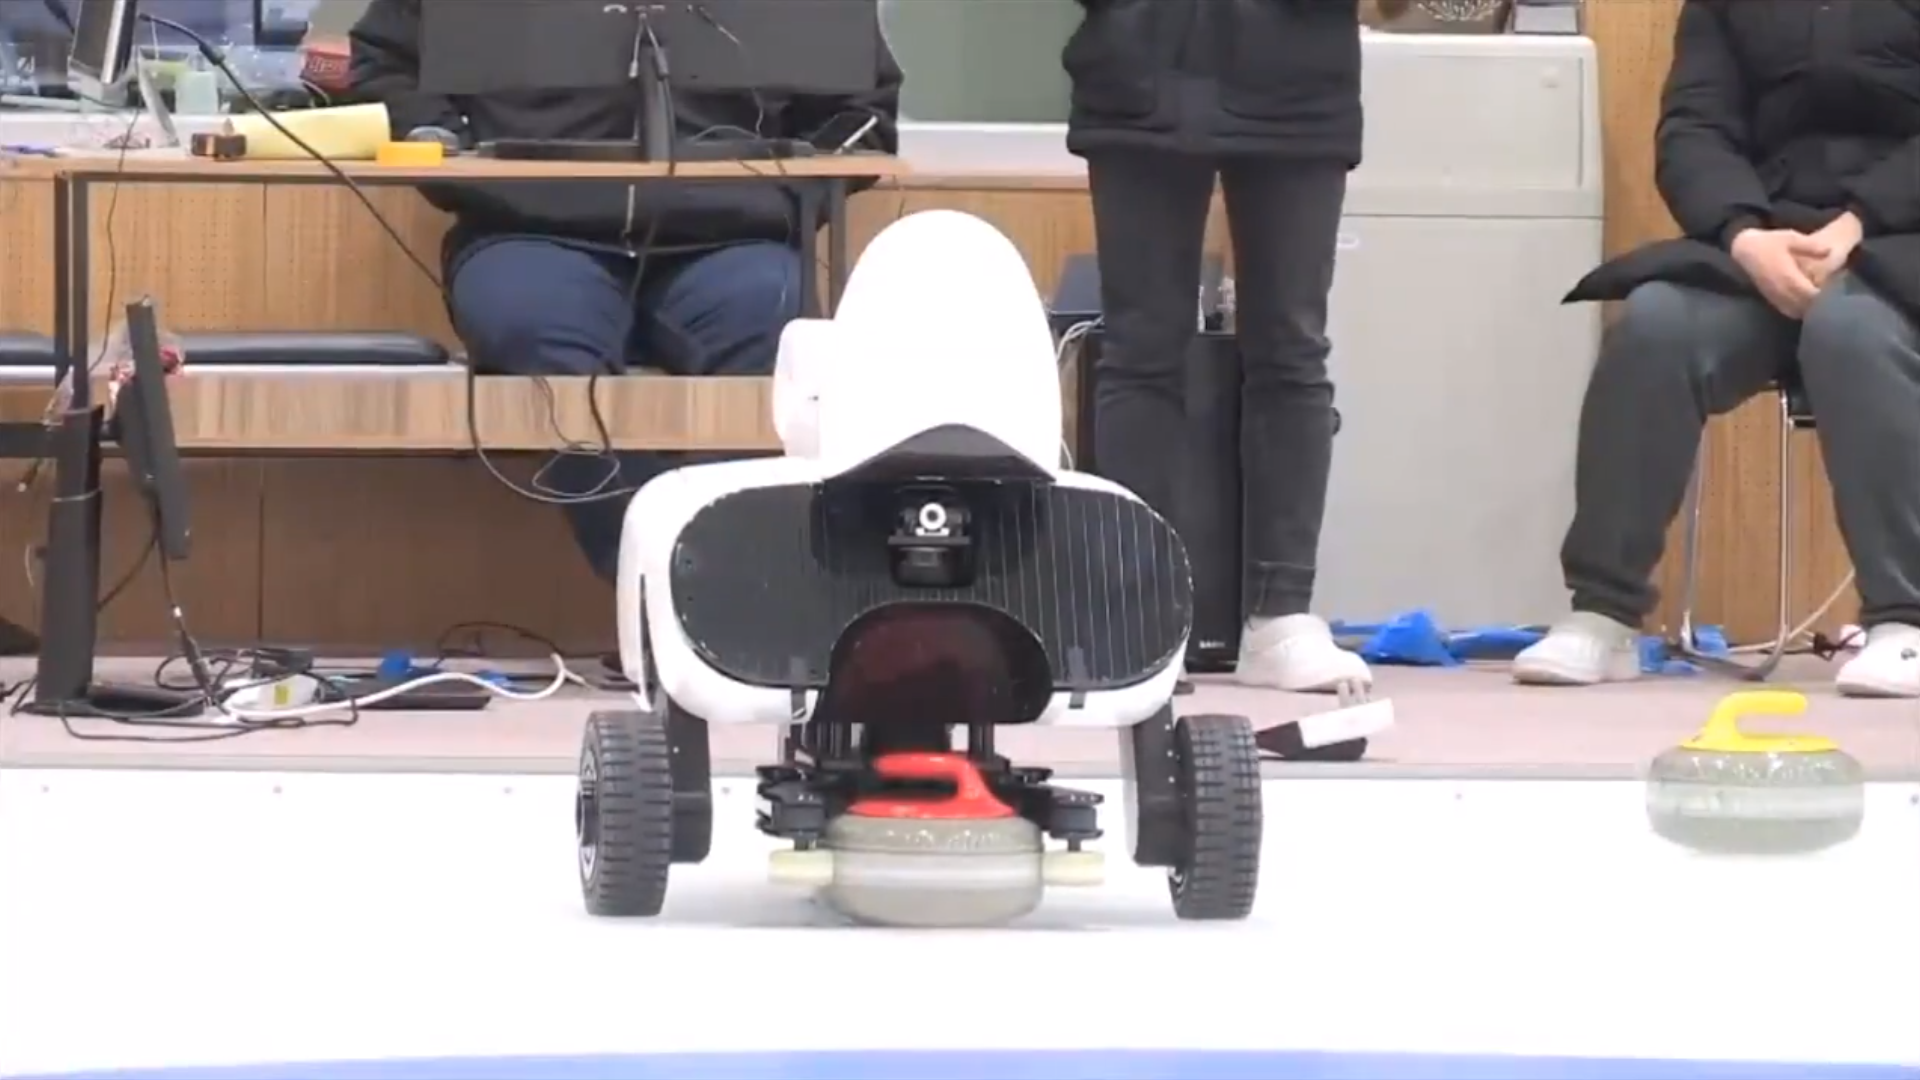 Robot beats human curling teams as part of research project